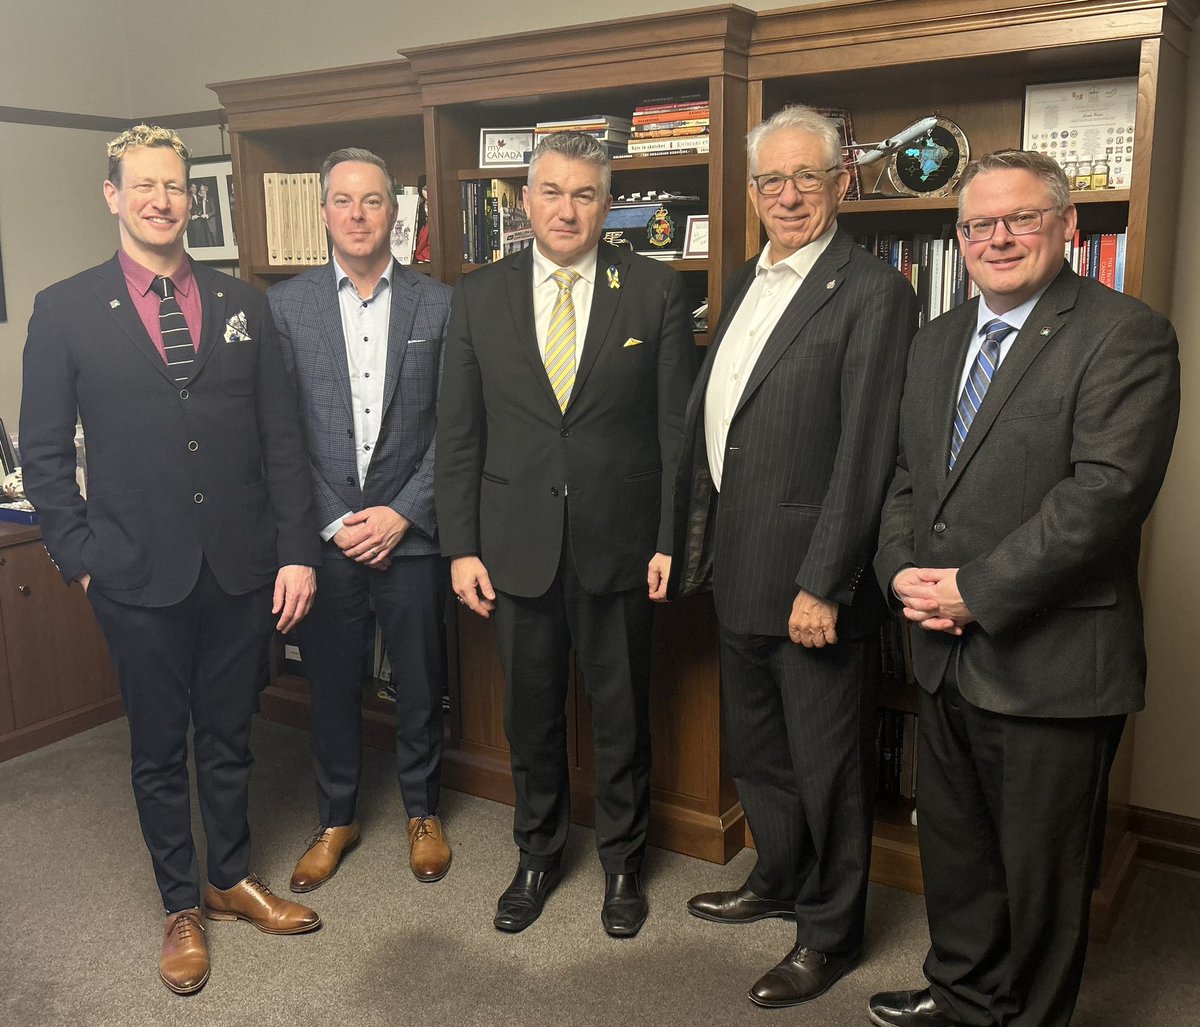 Thank you to @jamesbezan and @LarryMaguireMP for meeting with the @MBHomebuilders as part of @CHBANational Day on the Hill. We appreciate you chatting with us about residential construction issues impacting our industry. #CHBADayontheHill